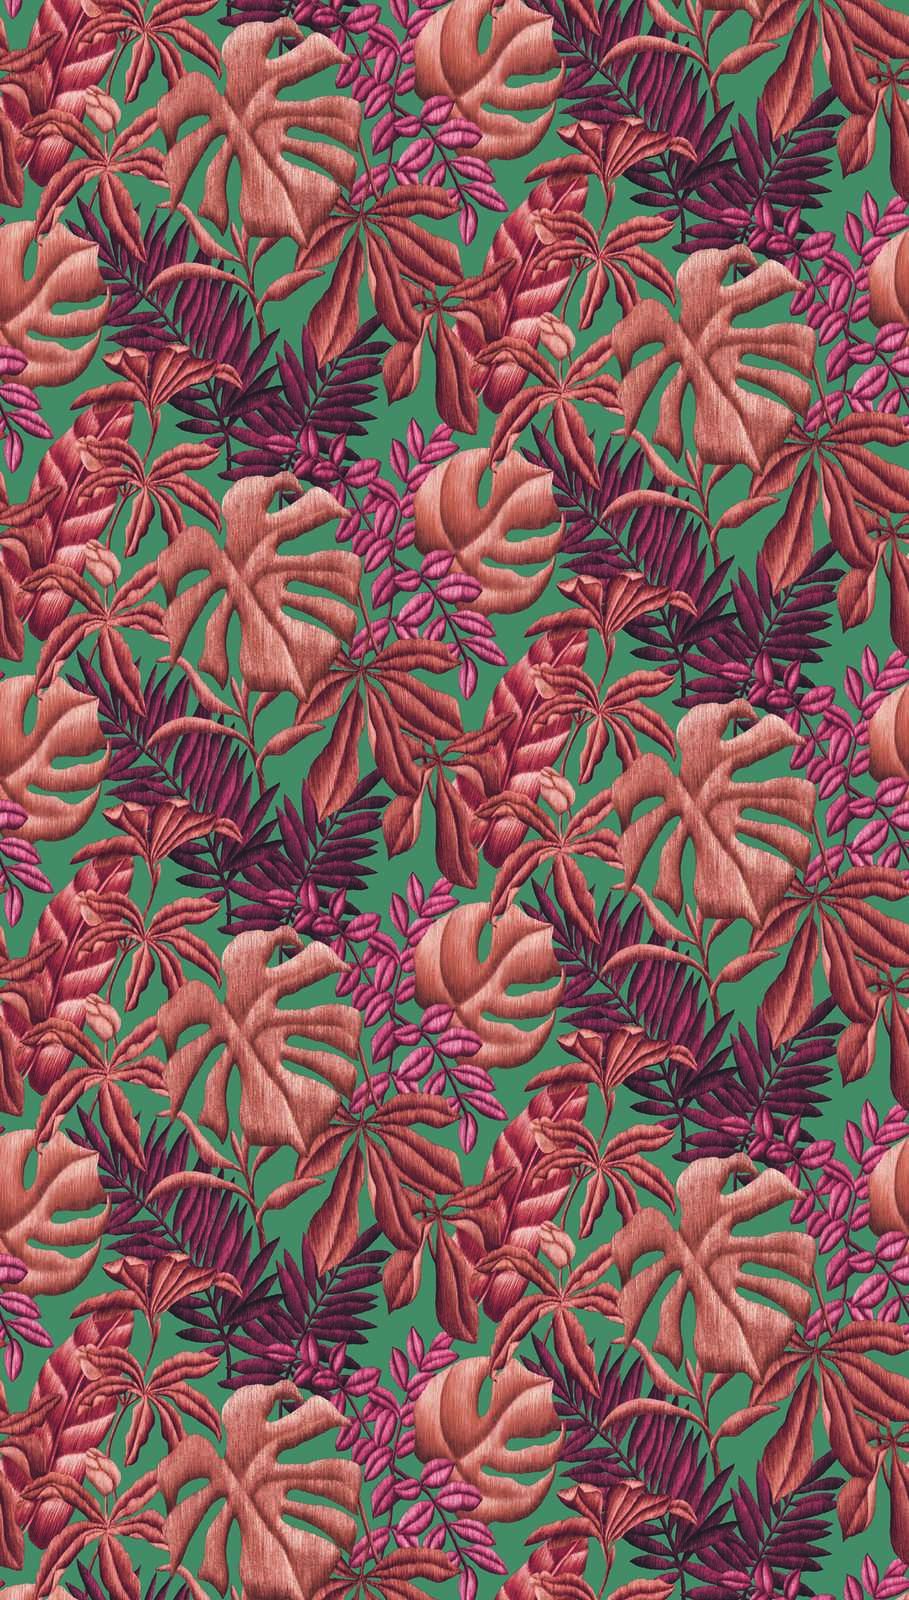             Wallpaper with large-scale leaf pattern fern & banana leaves - red, orange, turquoise
        